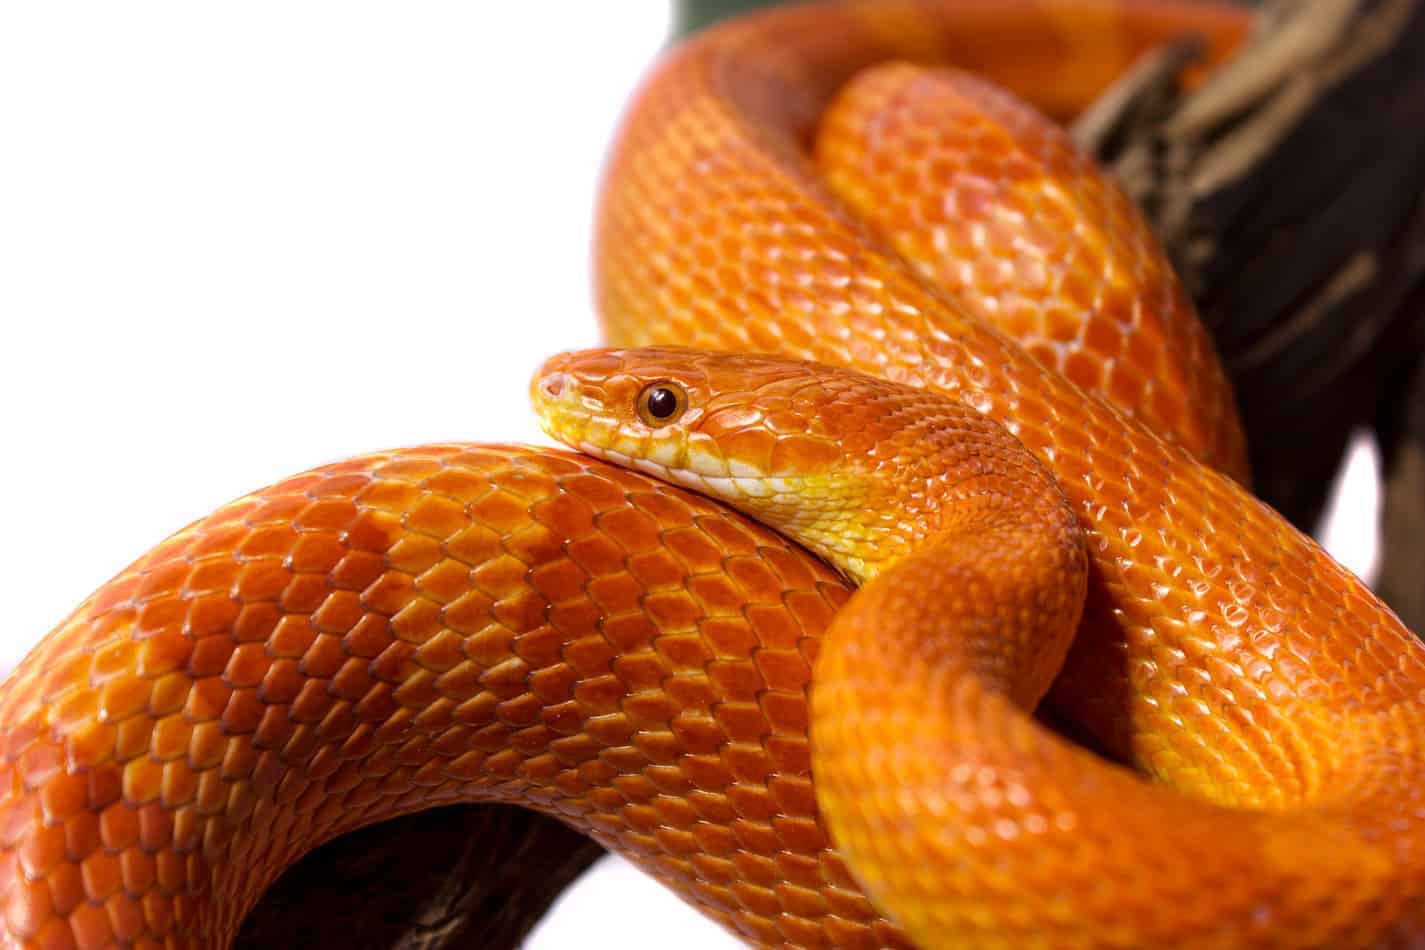 Cutest snakes corn snake List of Popular Pet Snake Breeds (With Pictures and Facts)